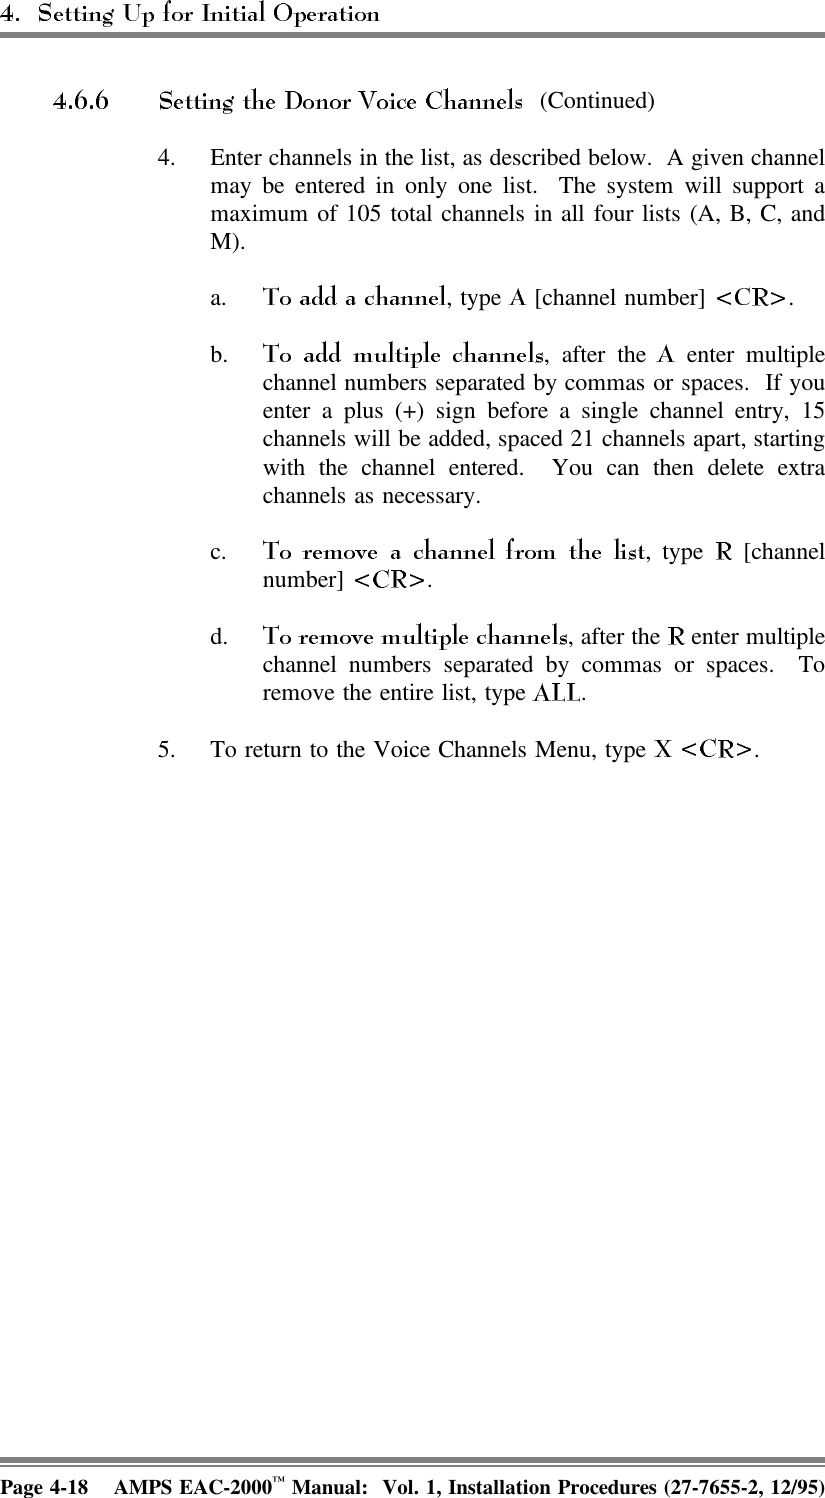  (Continued)4. Enter channels in the list, as described below.  A given channelmay be entered in only one list.  The system will support amaximum of 105 total channels in all four lists (A, B, C, andM).a. , type   [channel number]  .b. , after the   enter multiplechannel numbers separated by commas or spaces.  If youenter a plus (+) sign before a single channel entry, 15channels will be added, spaced 21 channels apart, startingwith the channel entered.  You can then delete extrachannels as necessary.c. , type   [channelnumber]  .d. , after the   enter multiplechannel numbers separated by commas or spaces.  Toremove the entire list, type  .5. To return to the Voice Channels Menu, type  .Page 4-18 AMPS EAC-2000™ Manual:  Vol. 1, Installation Procedures (27-7655-2, 12/95)